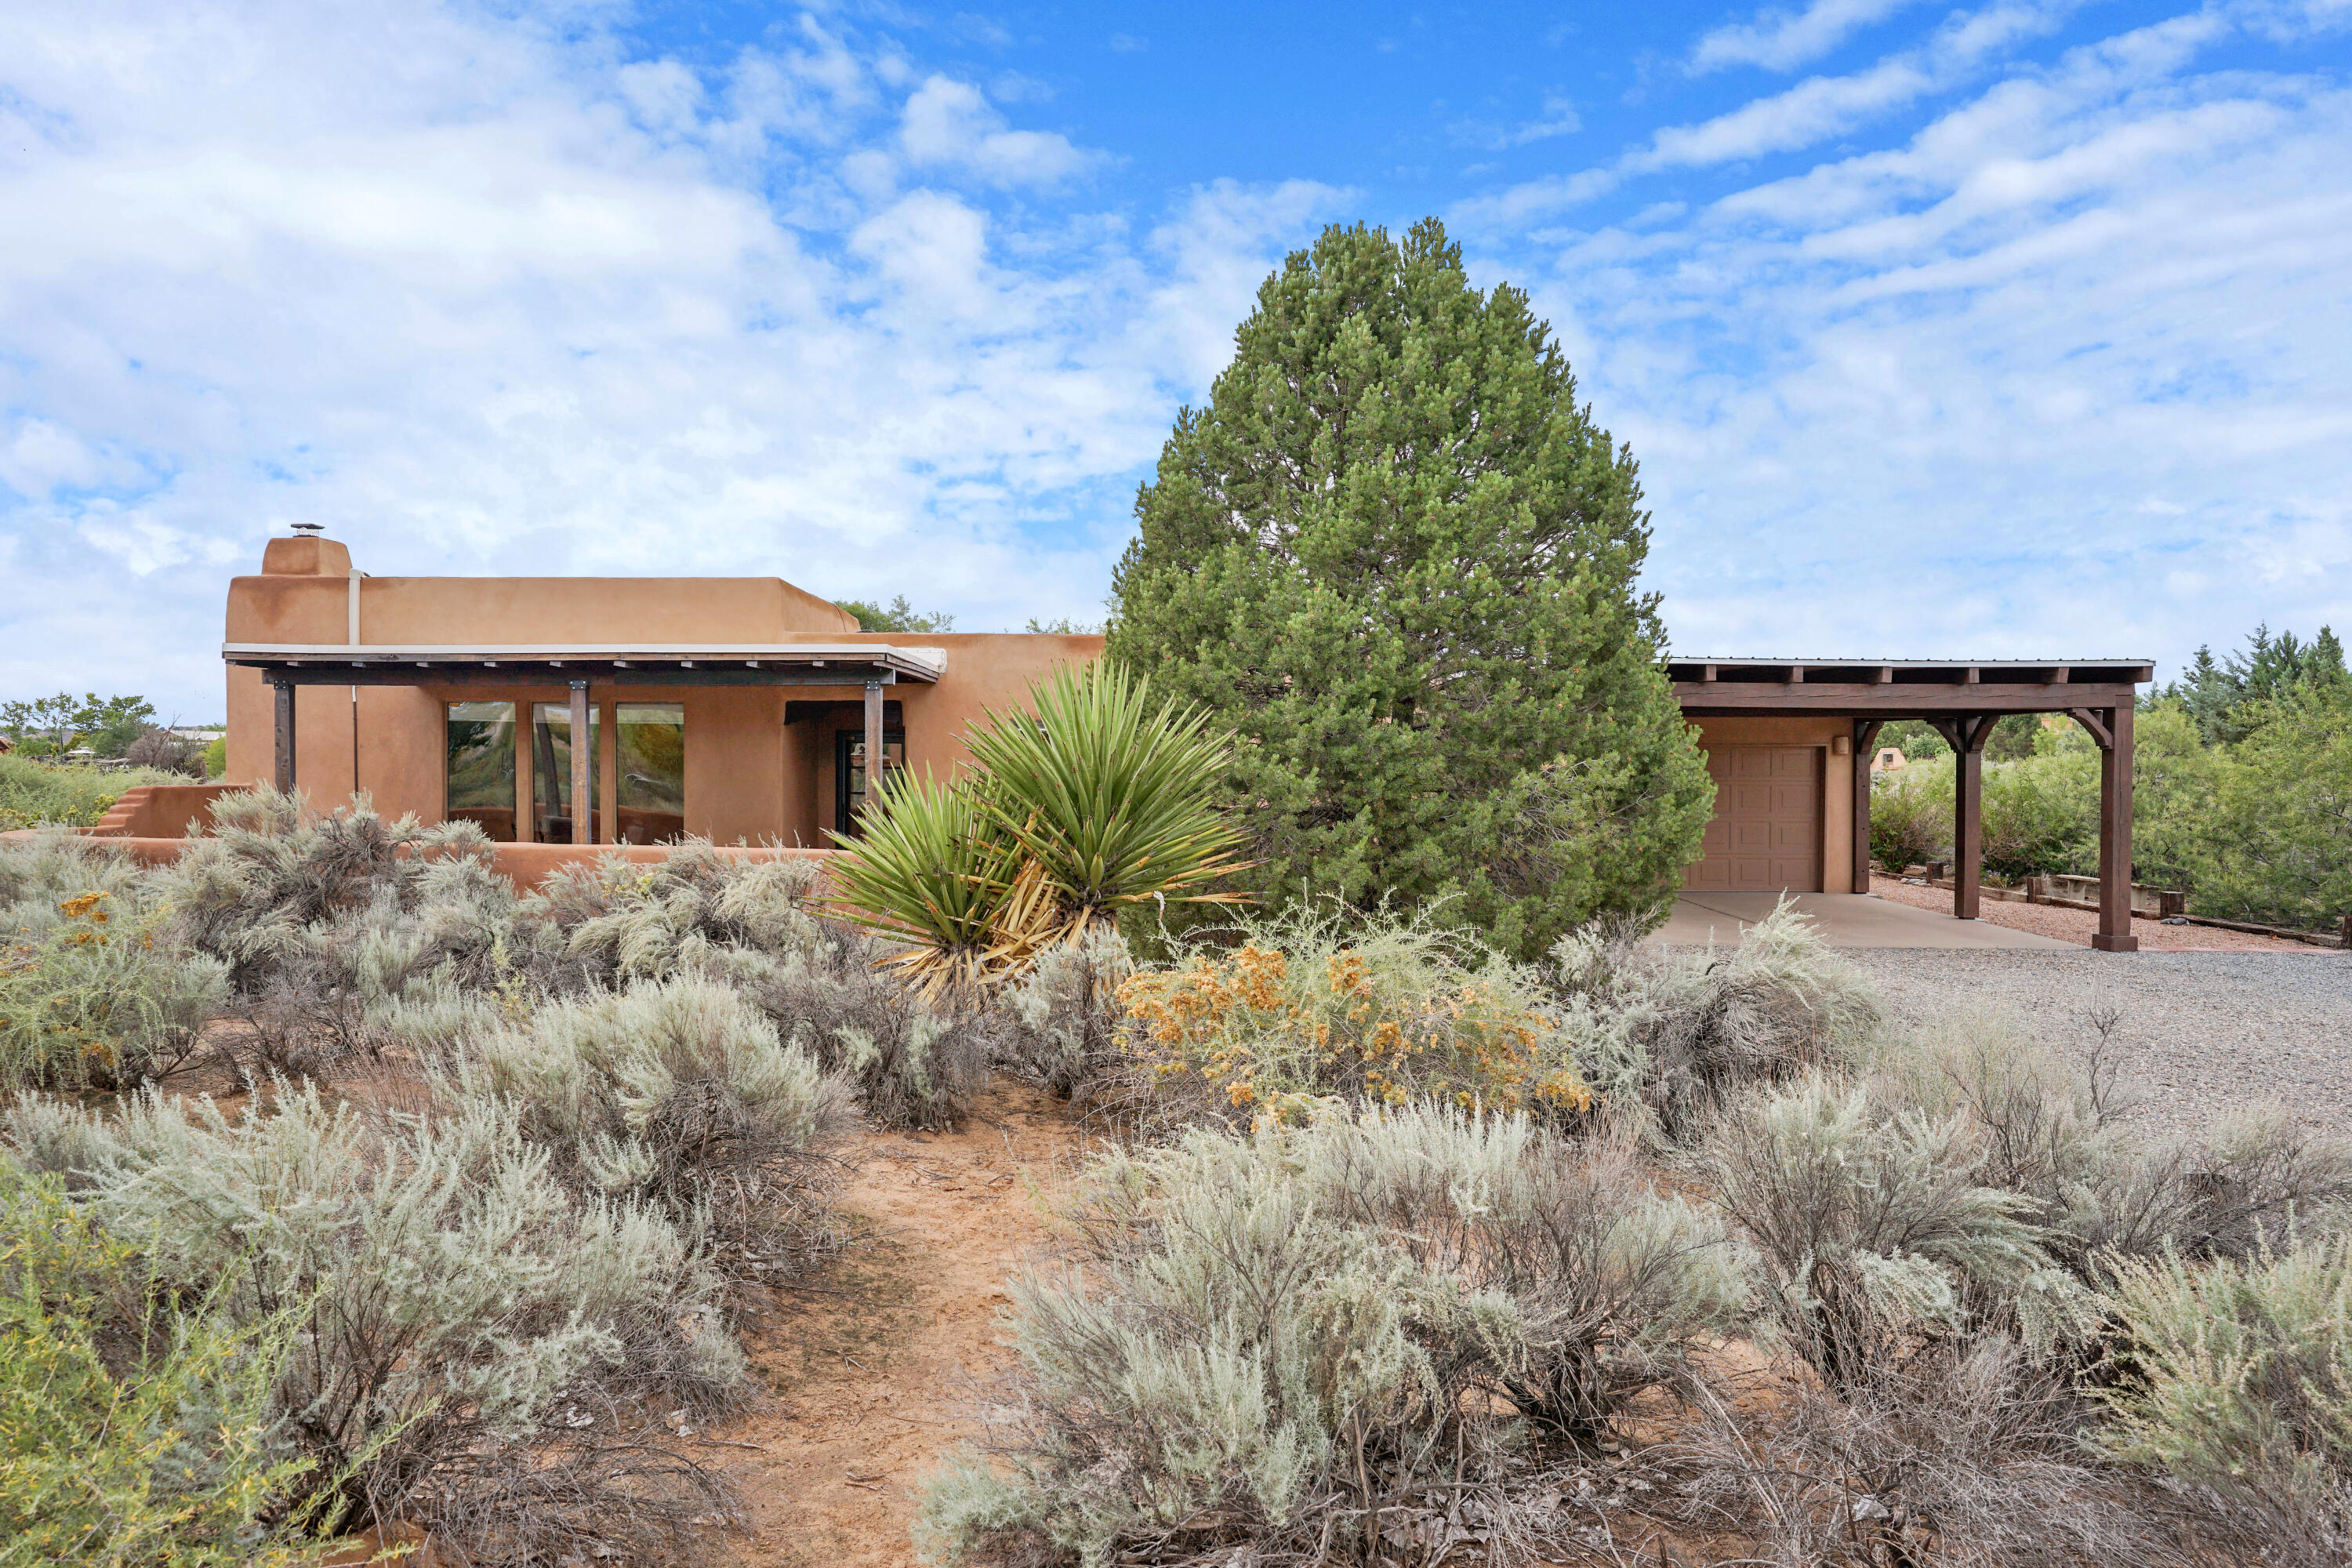 Don't miss out on this gorgeous southwestern style home in Corrales! This home features mountain views, viga-beam ceilings, and decorative wood beams throughout. Cozy up next to the kiva wood-burning fireplace or enjoy the views from under the covered patio. Bright, spacious kitchen with dining area, custom cabinets, double-oven gas range, island, and pot rack. The bonus room off the main house makes a great home office or craft room that is fully heated and cooled. Home includes a newer AC/heat mini-split system to complement baseboard heating. Other features include a 2-car garage plus carport, a TPO roof, a whole-house water filtration/soft-water system with RO filter in kitchen, a rainwater catchment system, chicken coop, utility shed, two fenced garden areas, and an outdoor sink.